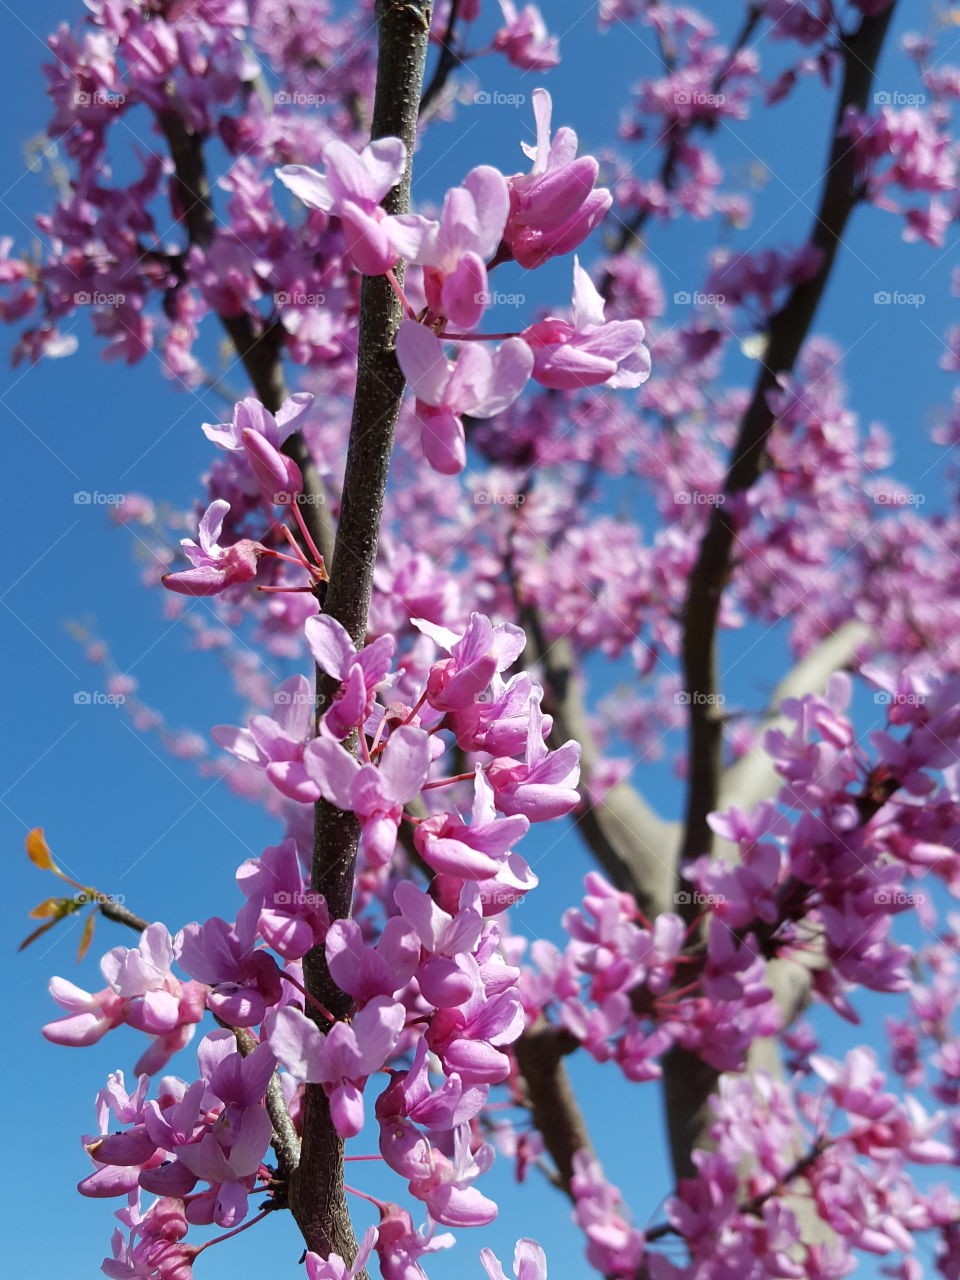 Low angle view of a cherry blossom tree branch